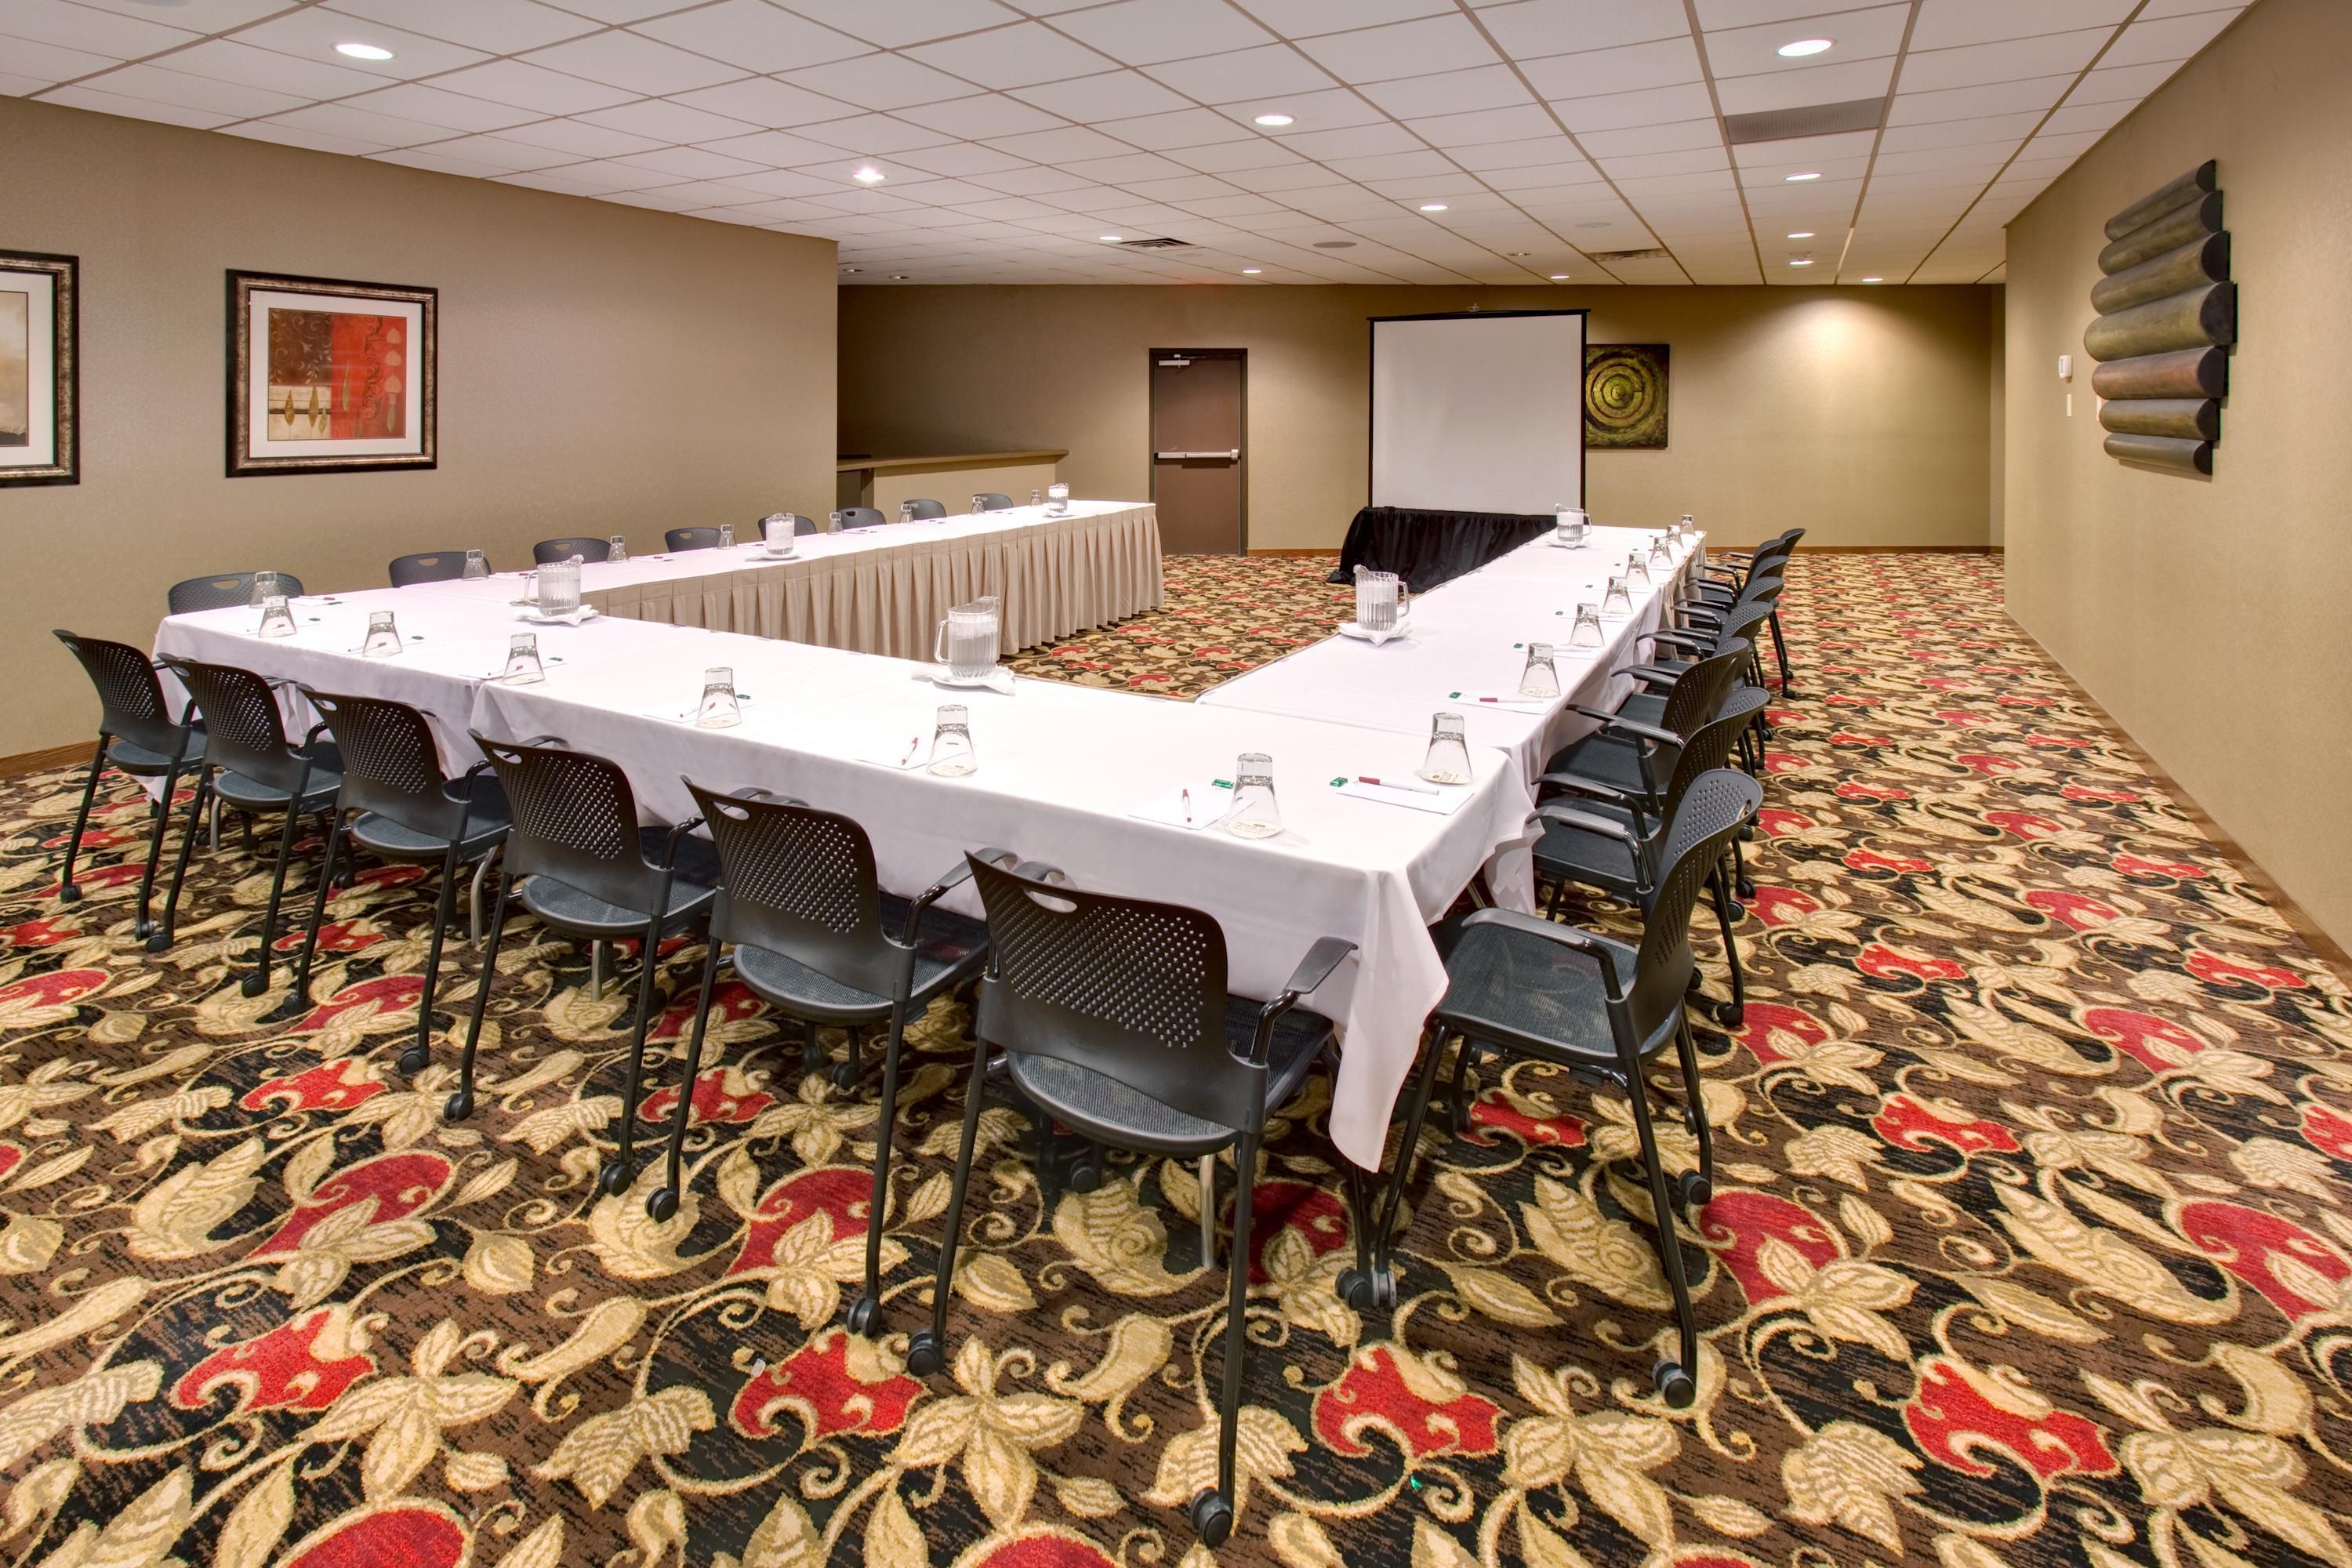 Mtg Rm at the Crowne Plaza, a Milwaukee Wisconsin Airport Hotel